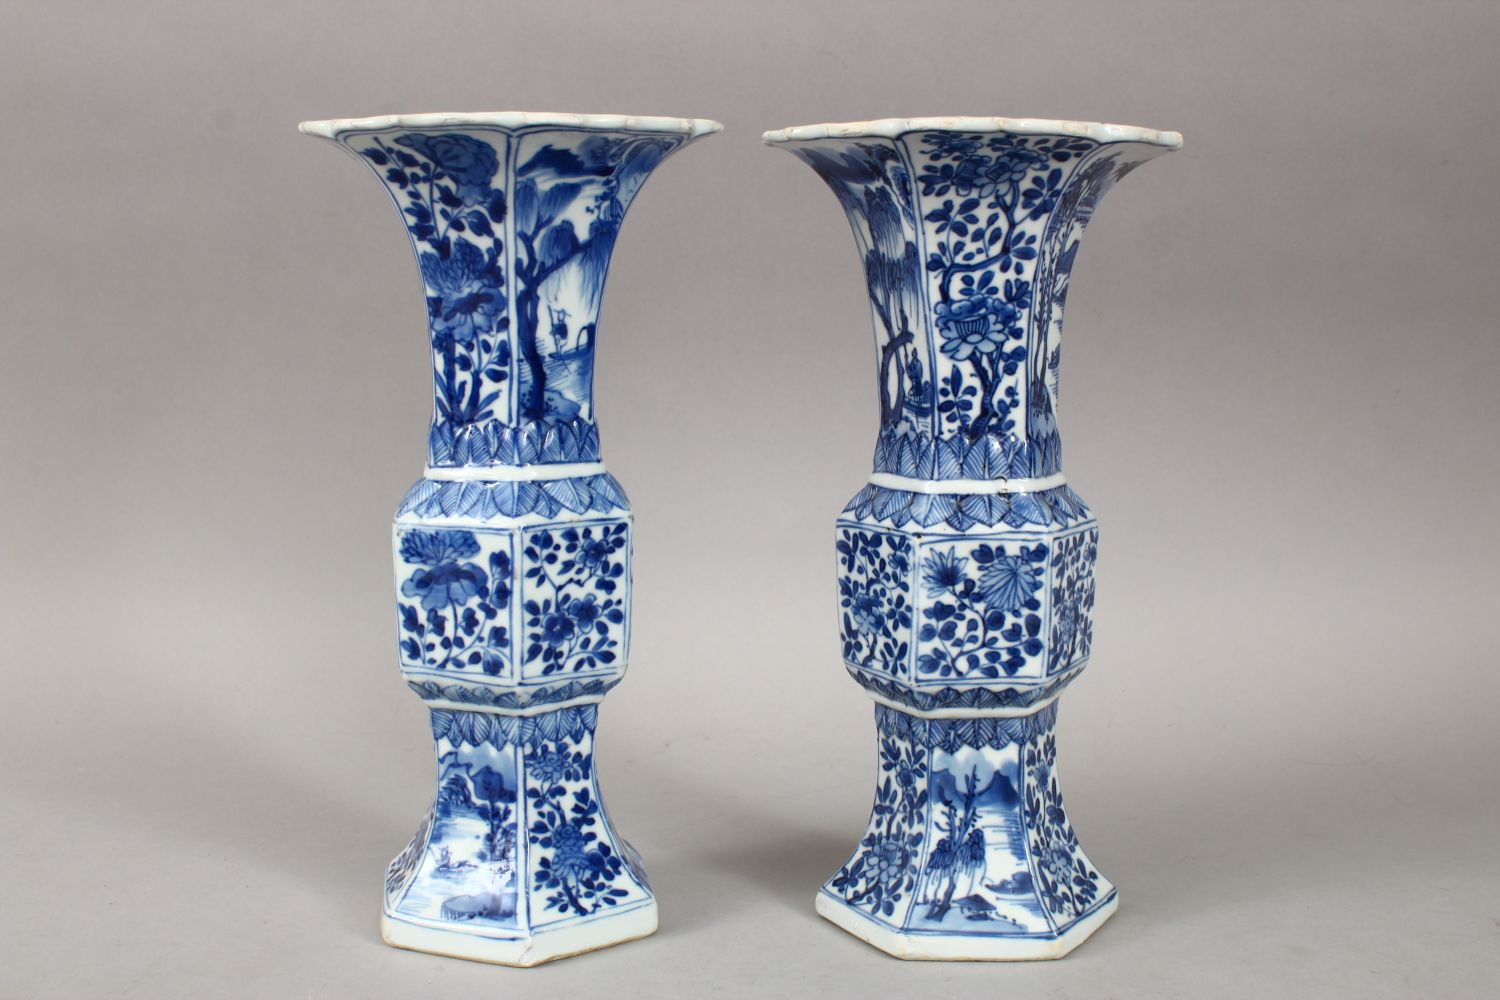 A GOOD PAIR OF 18TH CENTURY CHINESE KANGXI BLUE & WHITE GU SHAPE PORCELAIN VASES, with a multitude - Image 4 of 10